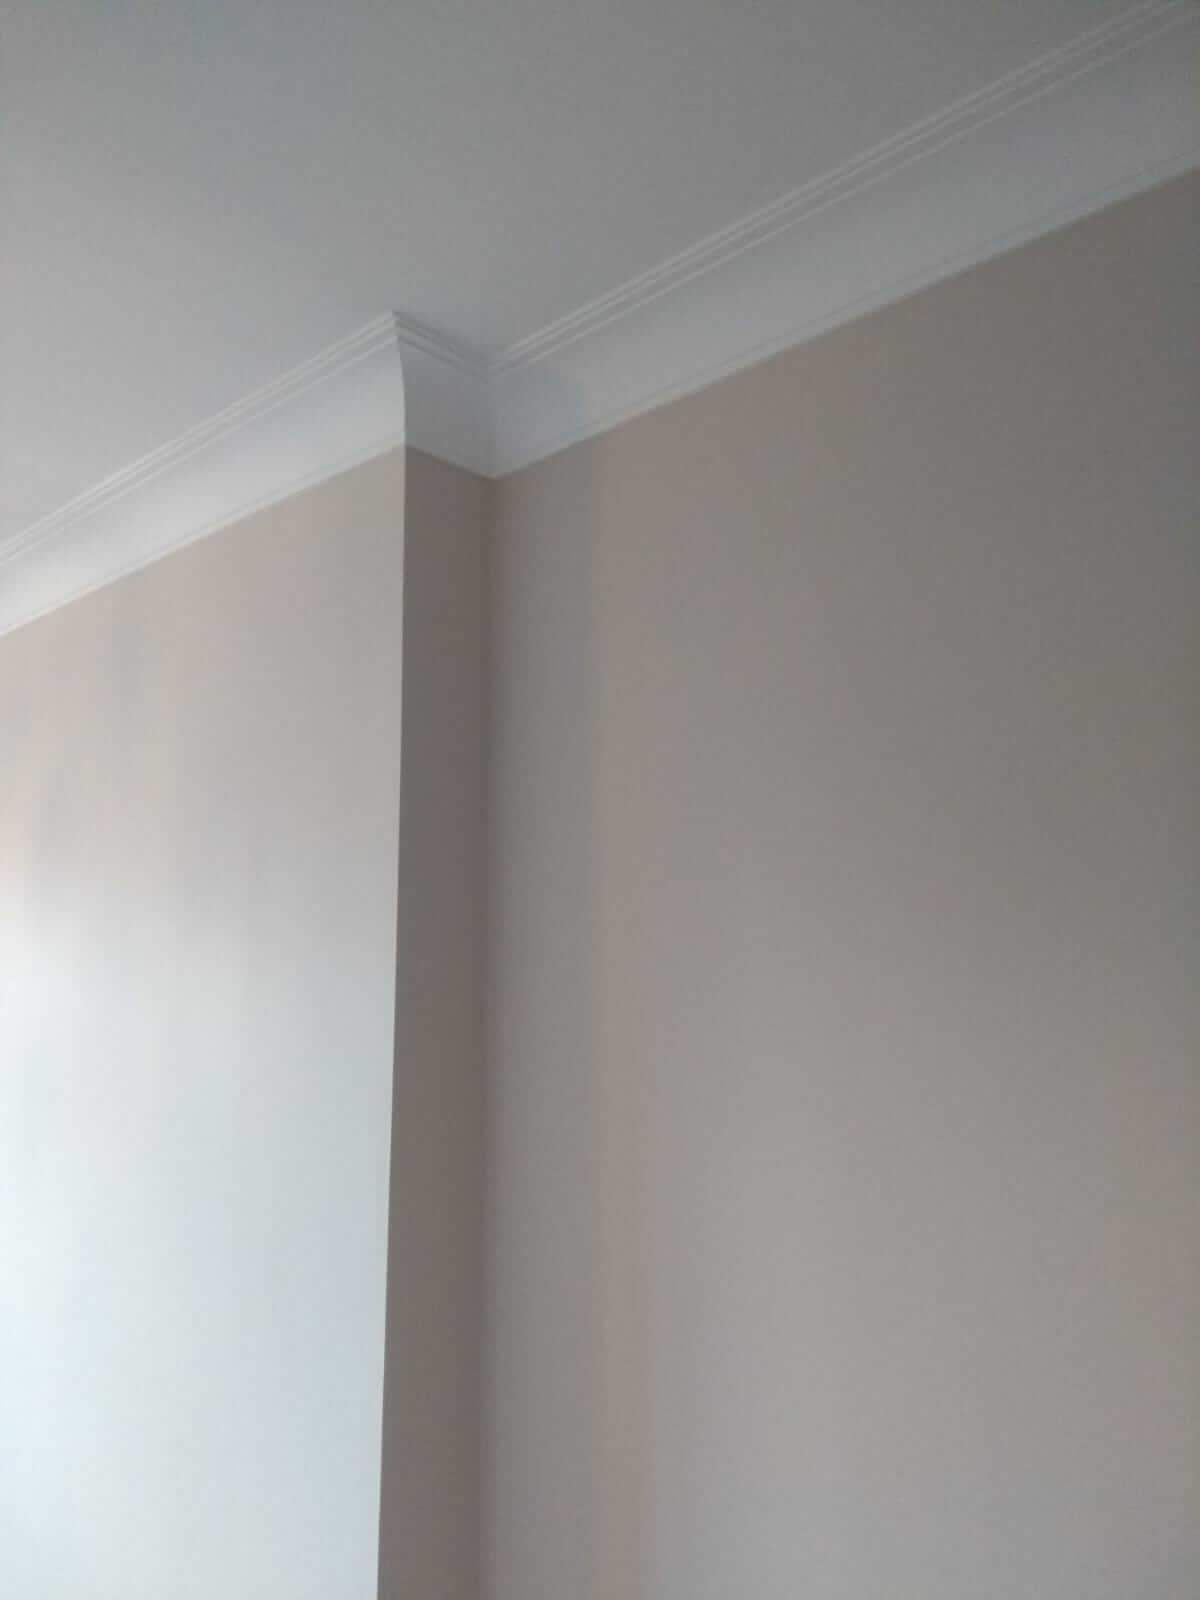 MD105 Coving - Lightweight Coving above a plain wall